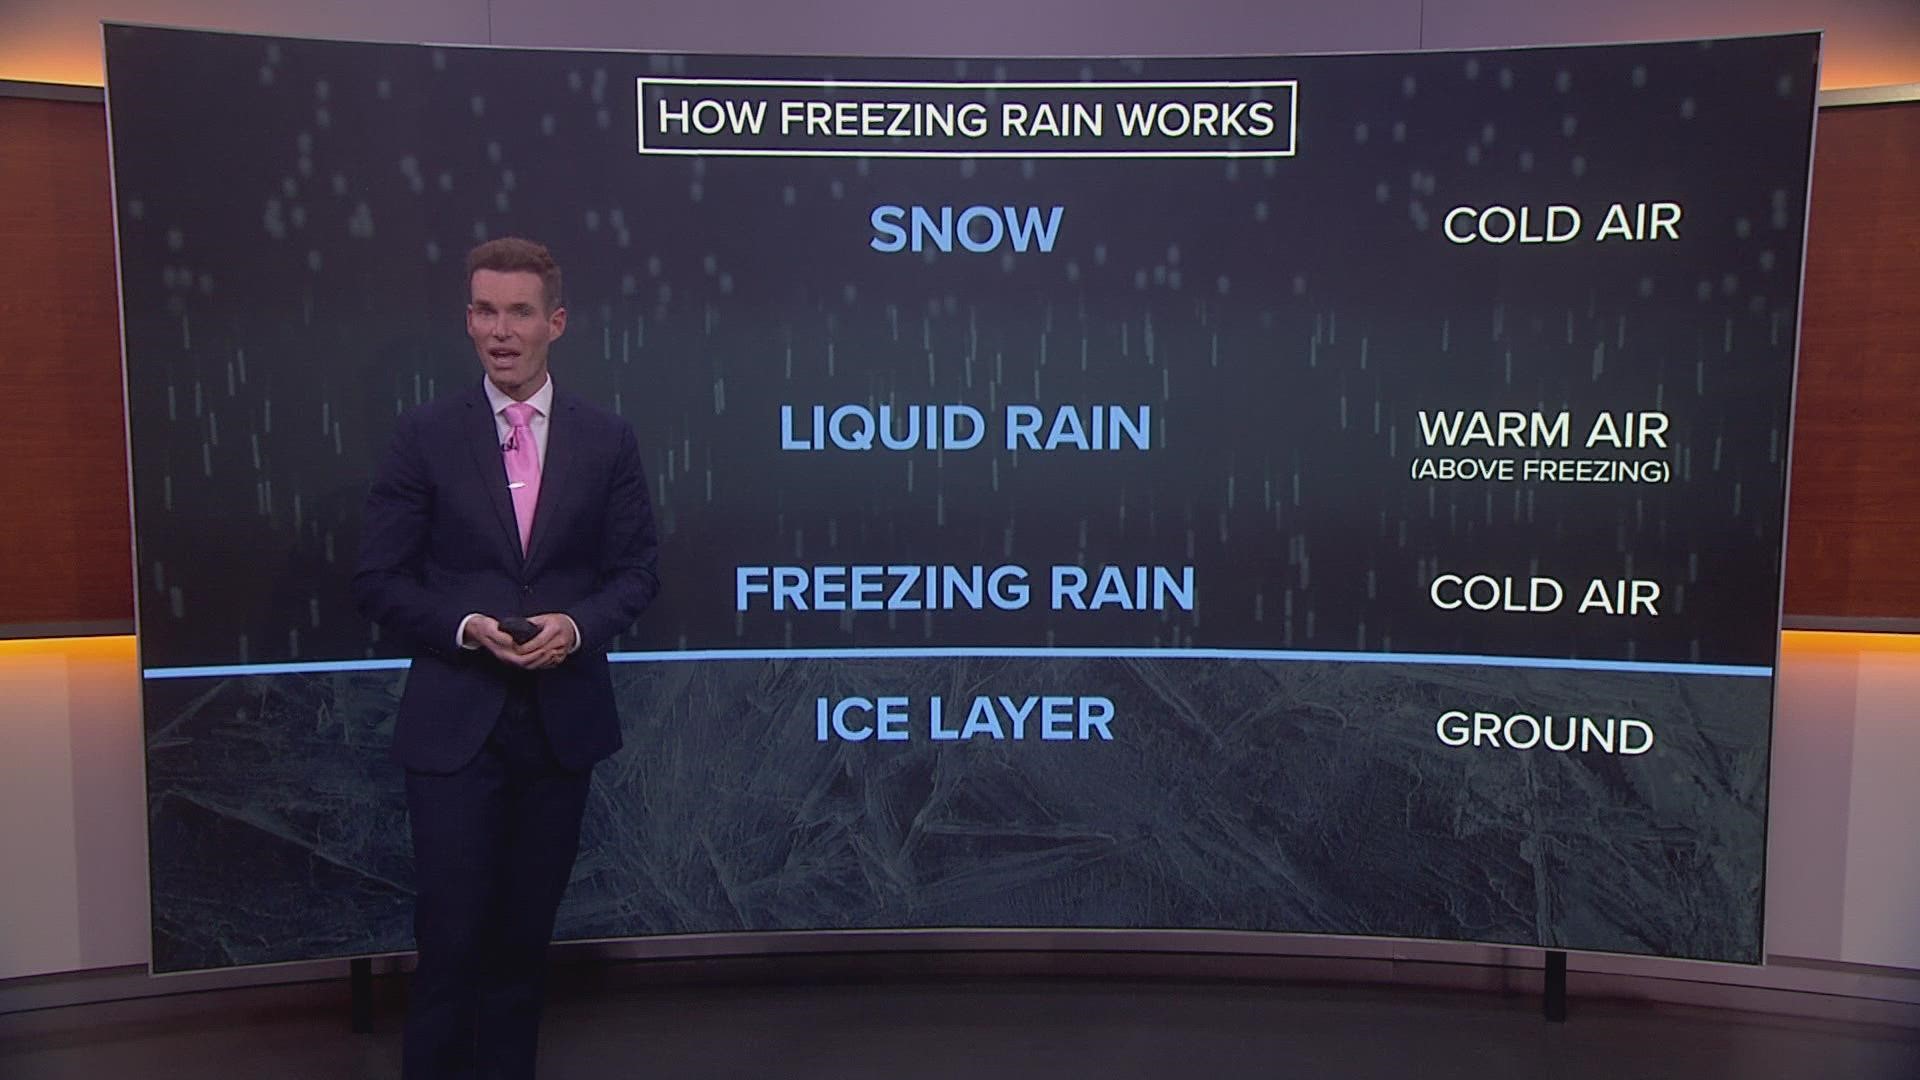 Here's a detailed explanation of freezing rain and why it's rare occurrence in Washington state.